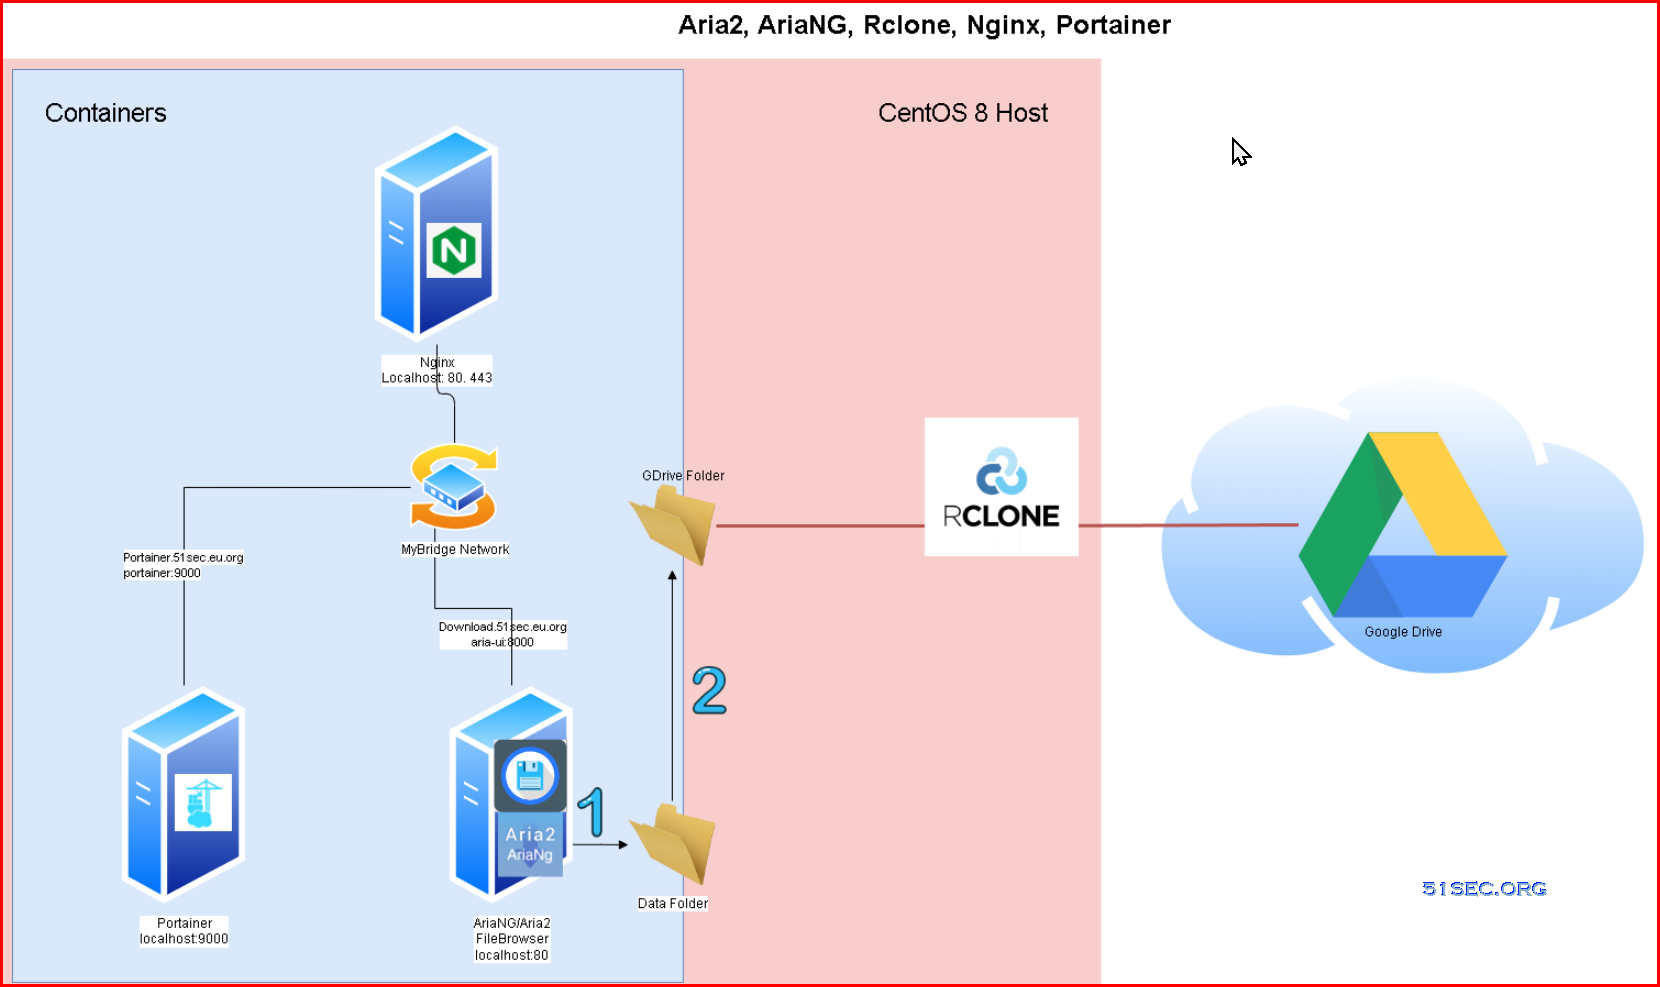 Use Aria2+AriaNg Docker to download and Use Rclone to Sync To Cloud Drives